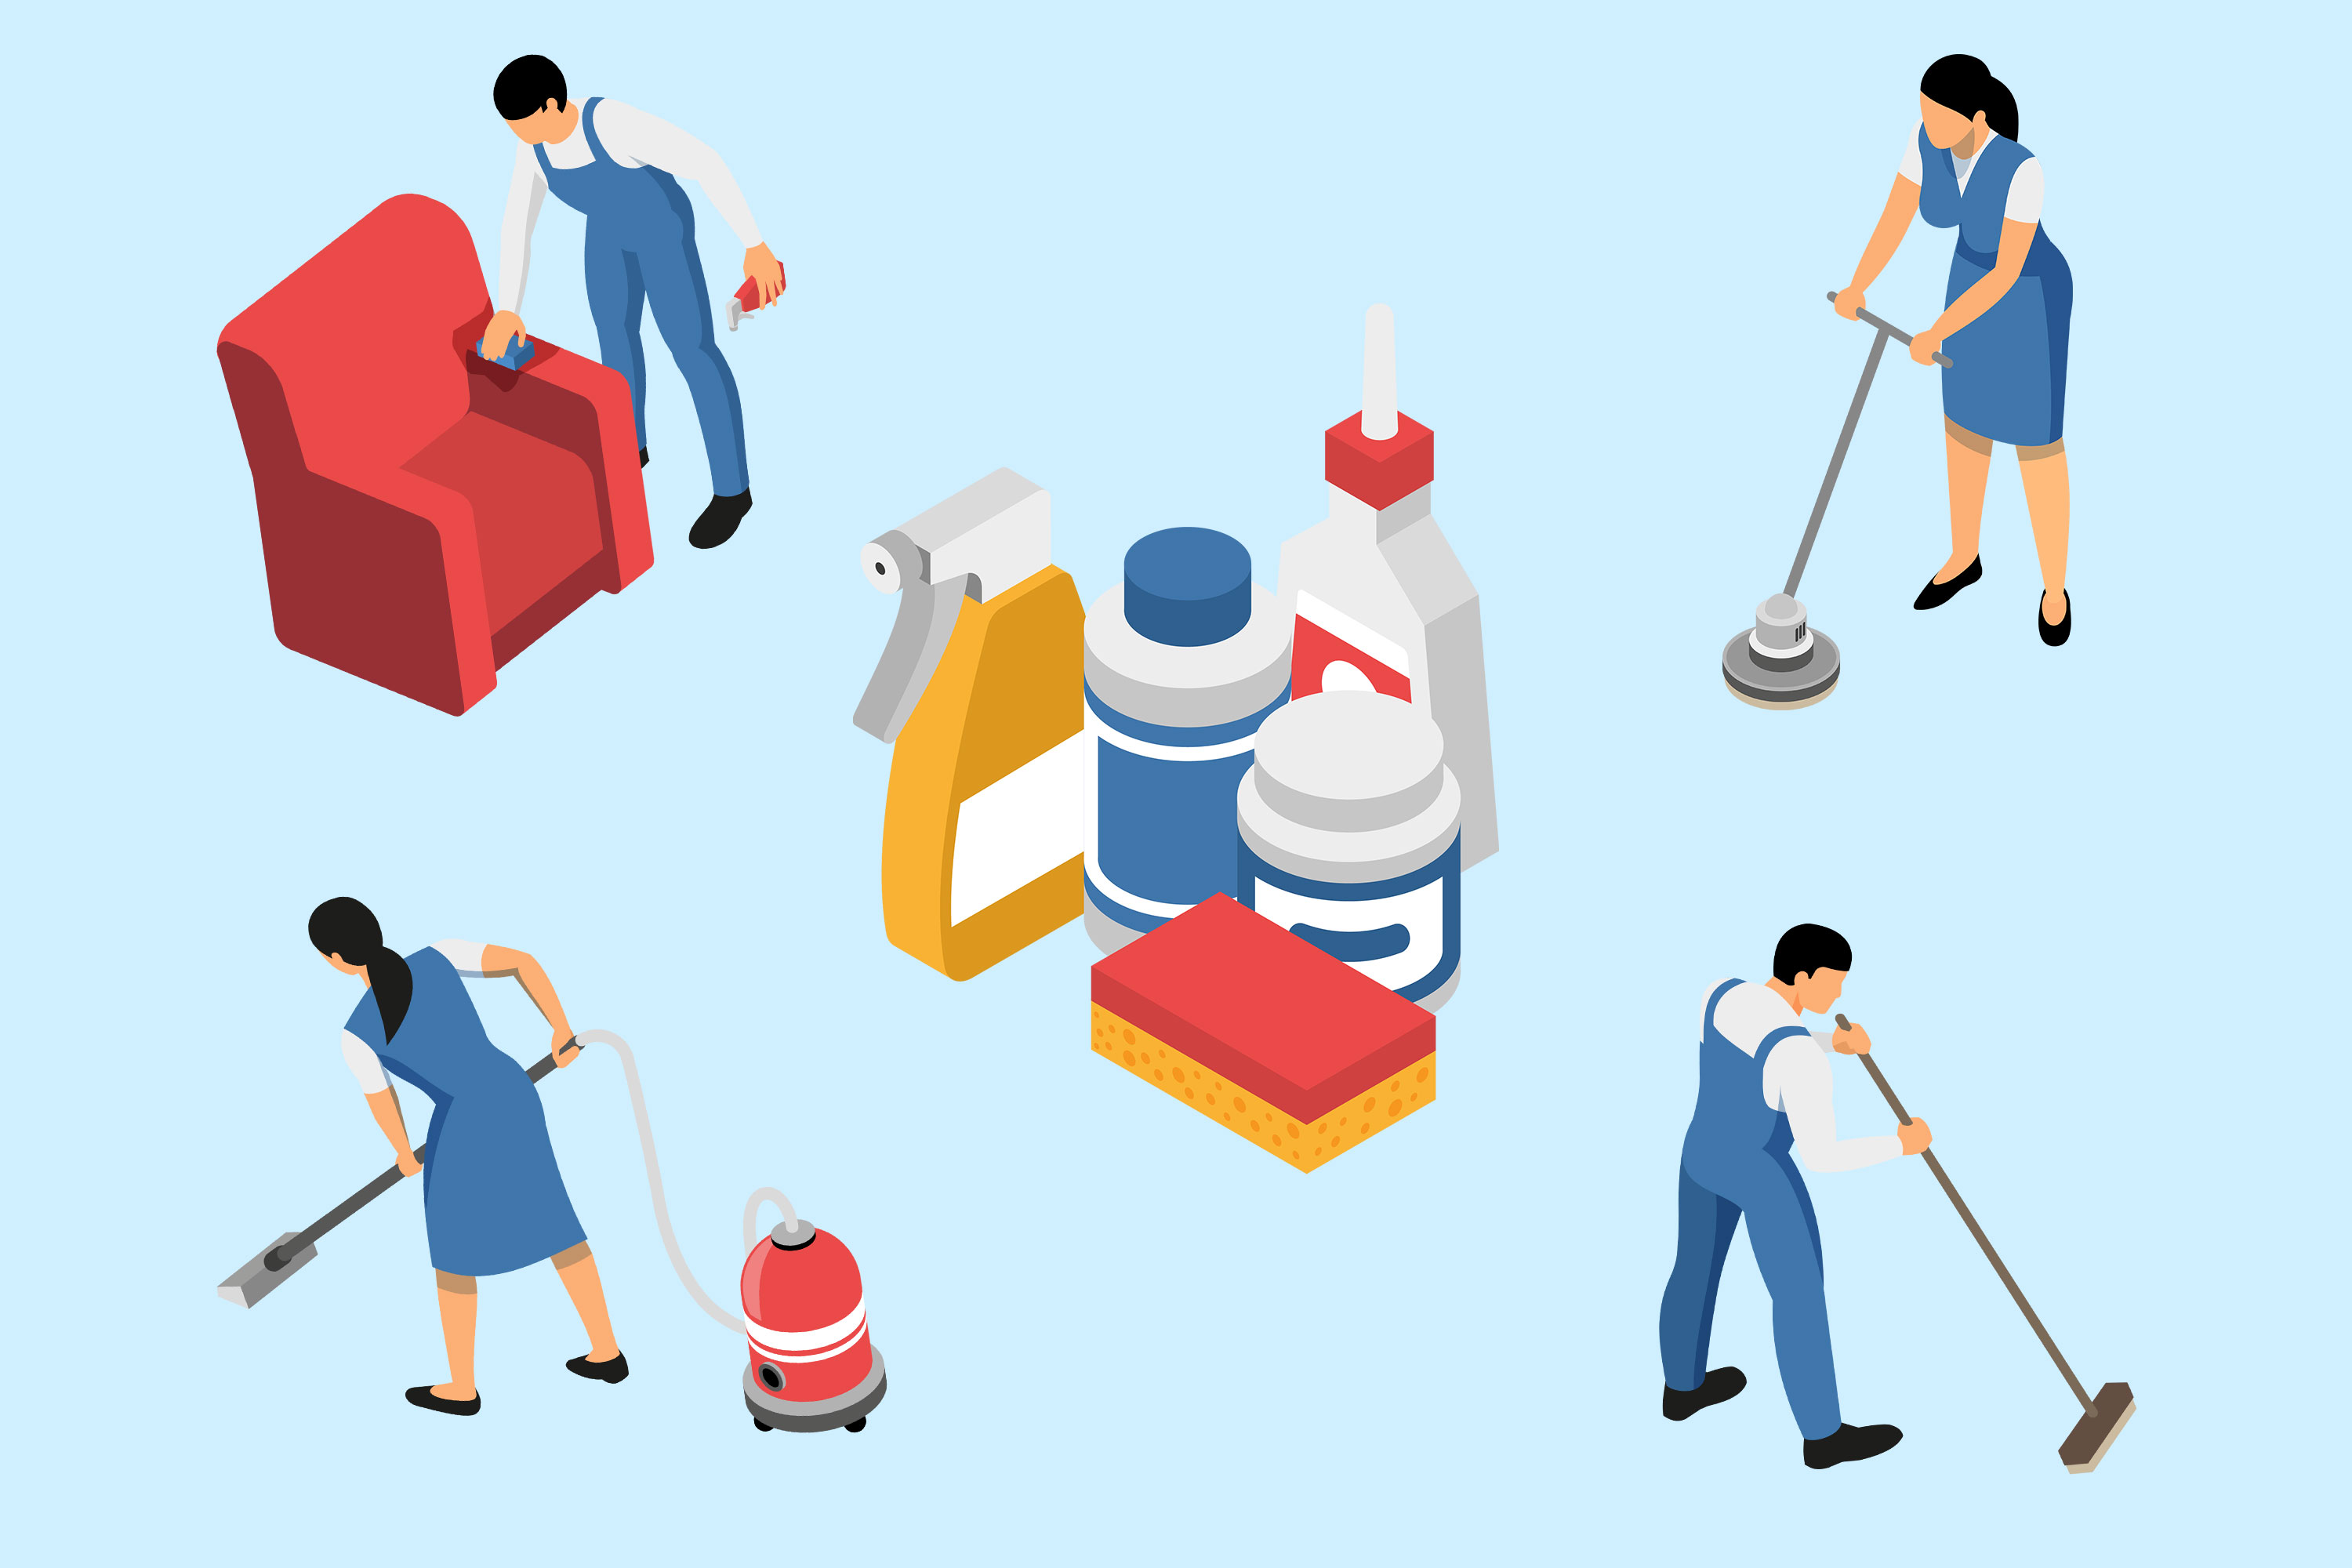 Various Professional Cleaning Services and Materials like Vacuum, Sweep, Wipe, Mop